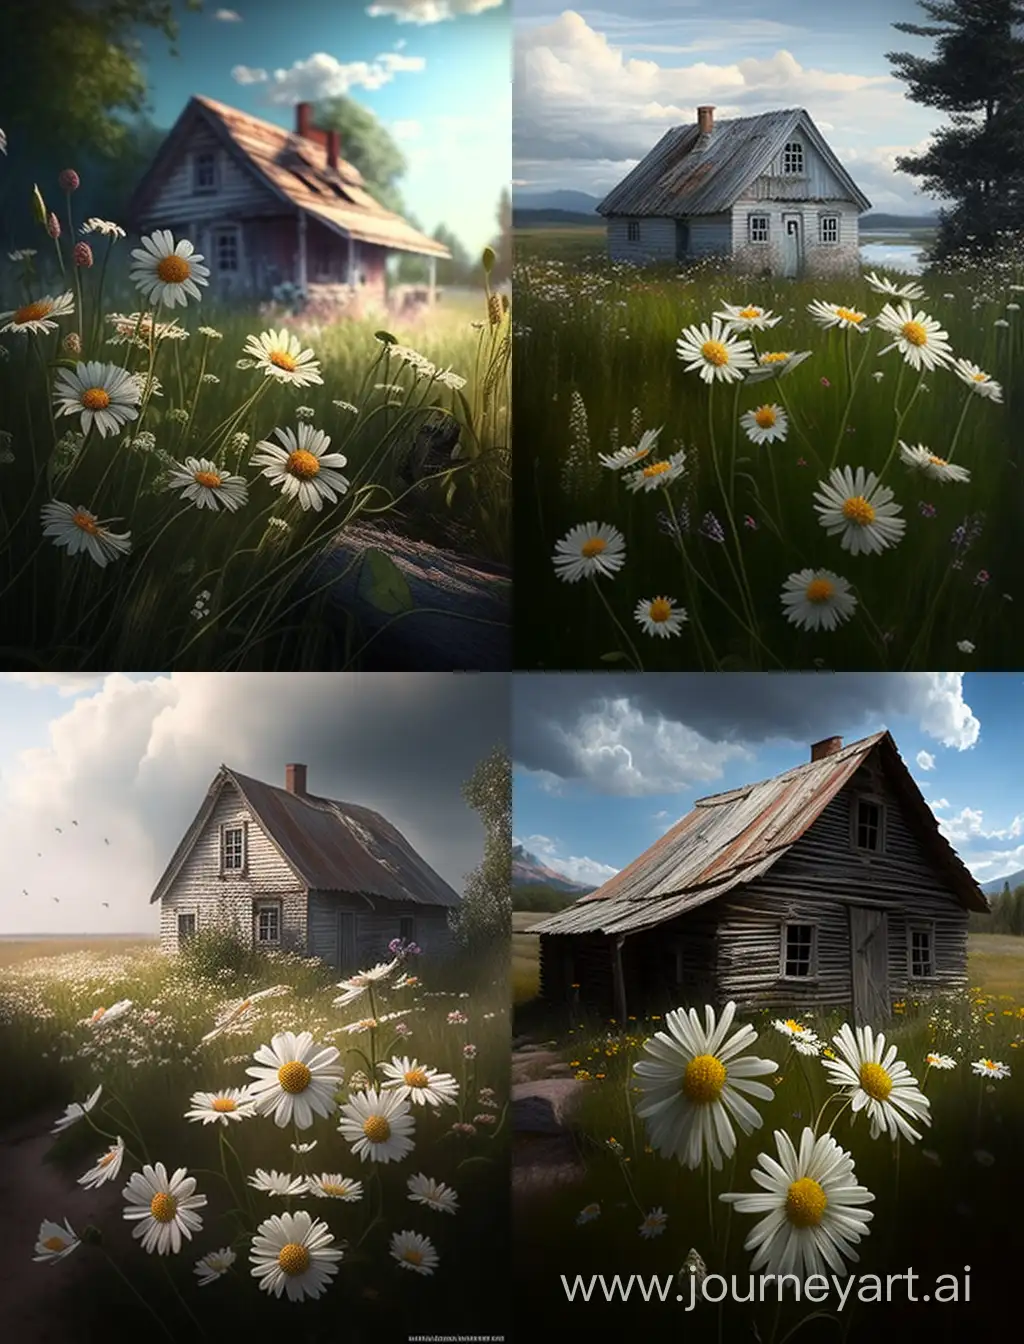 Charming-Summer-Scene-Blooming-Daisies-Surrounding-a-Quaint-Little-House